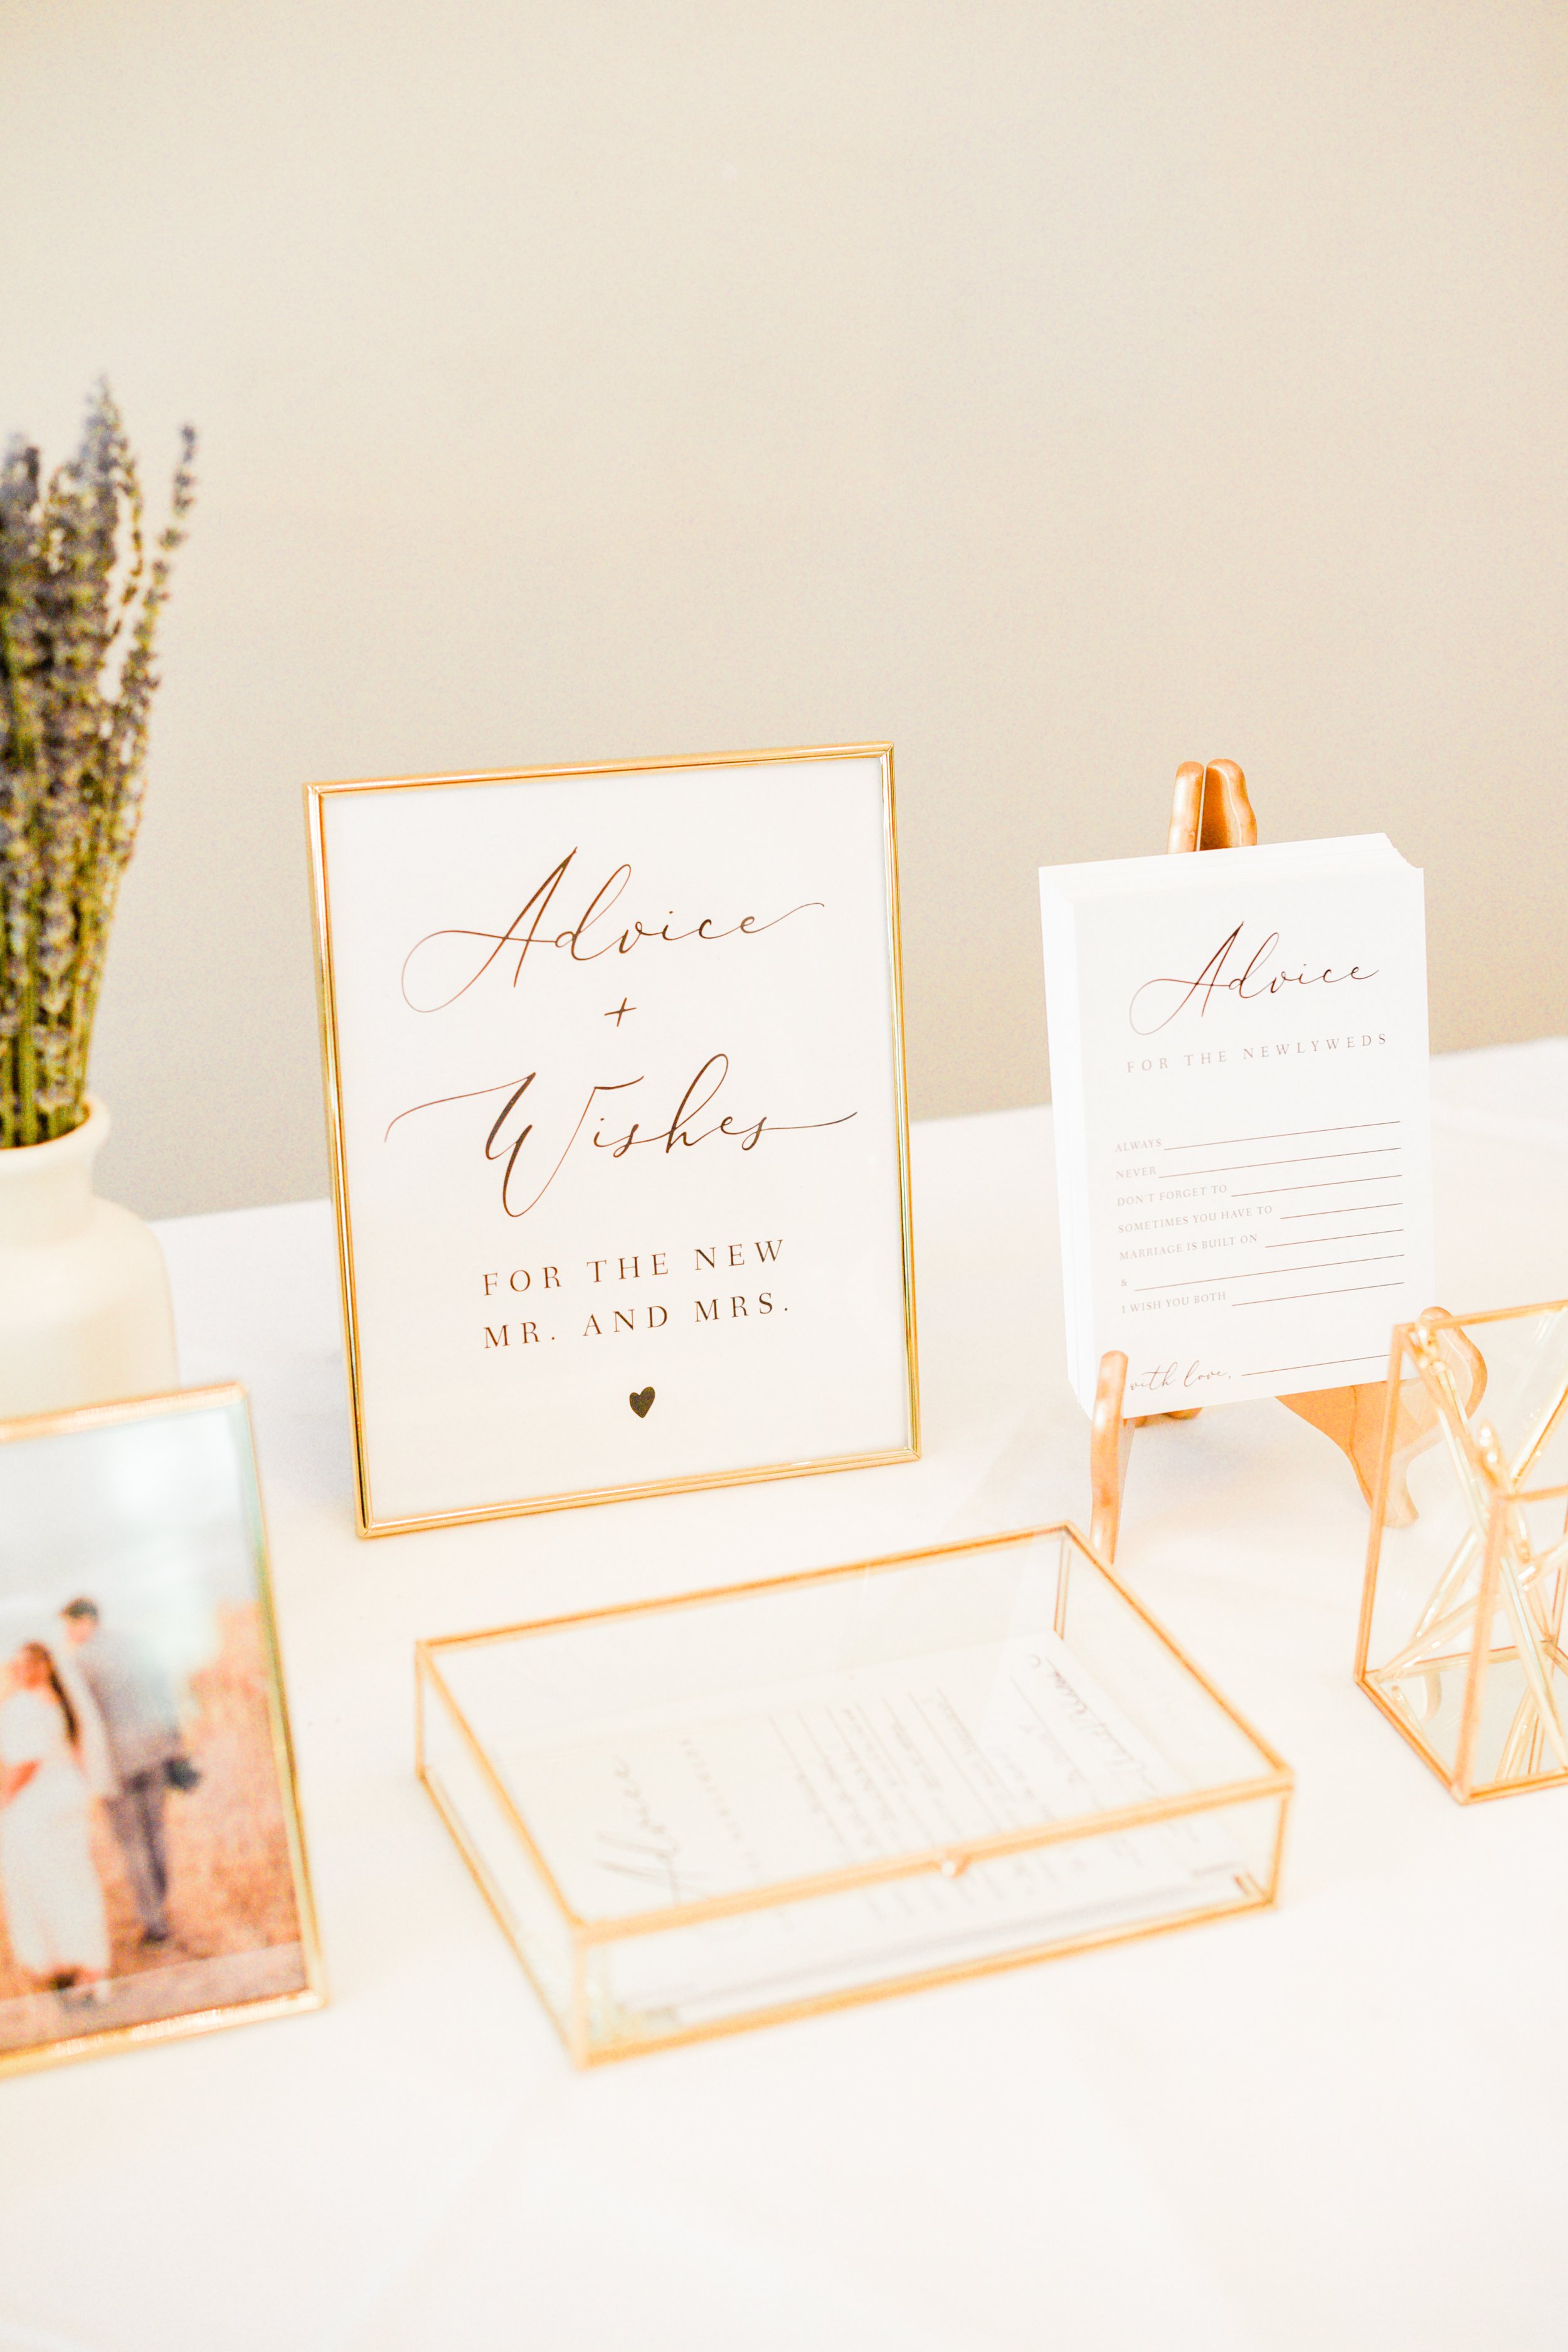  An elegant sign directs guests to leave their advice and wishes in a tray for the new couple at a wedding photographed by Georgia wedding photographer, Jacquie Erickson. wedding must-haves document your wedding #atlantaweddingphotographer #memorable